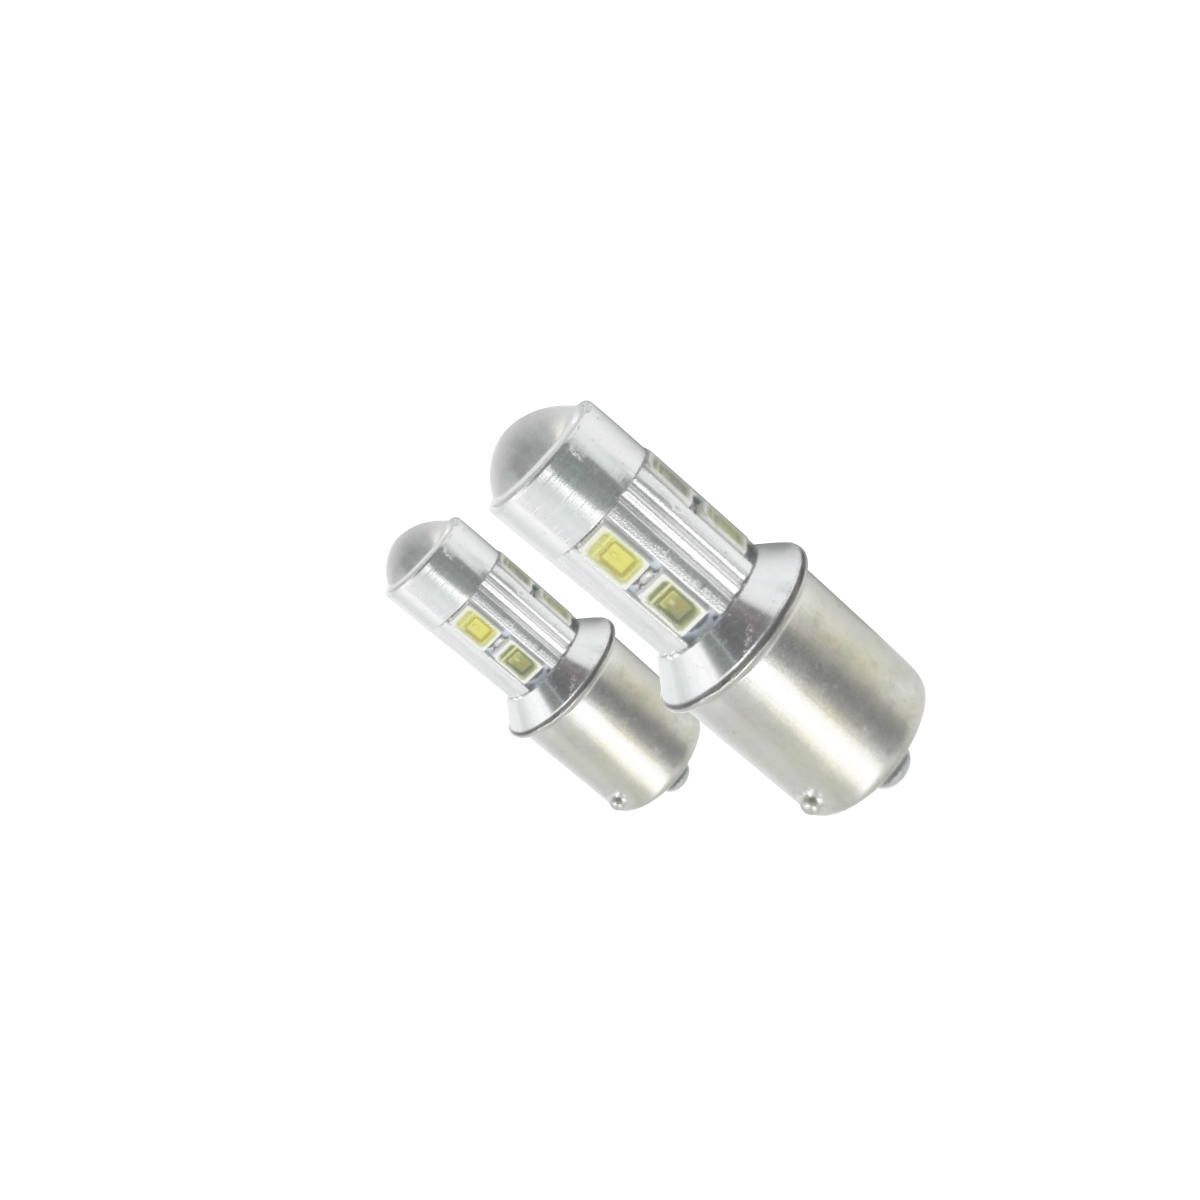 BRAKE LIGHT DOUBLE 10 SMD CANBUS